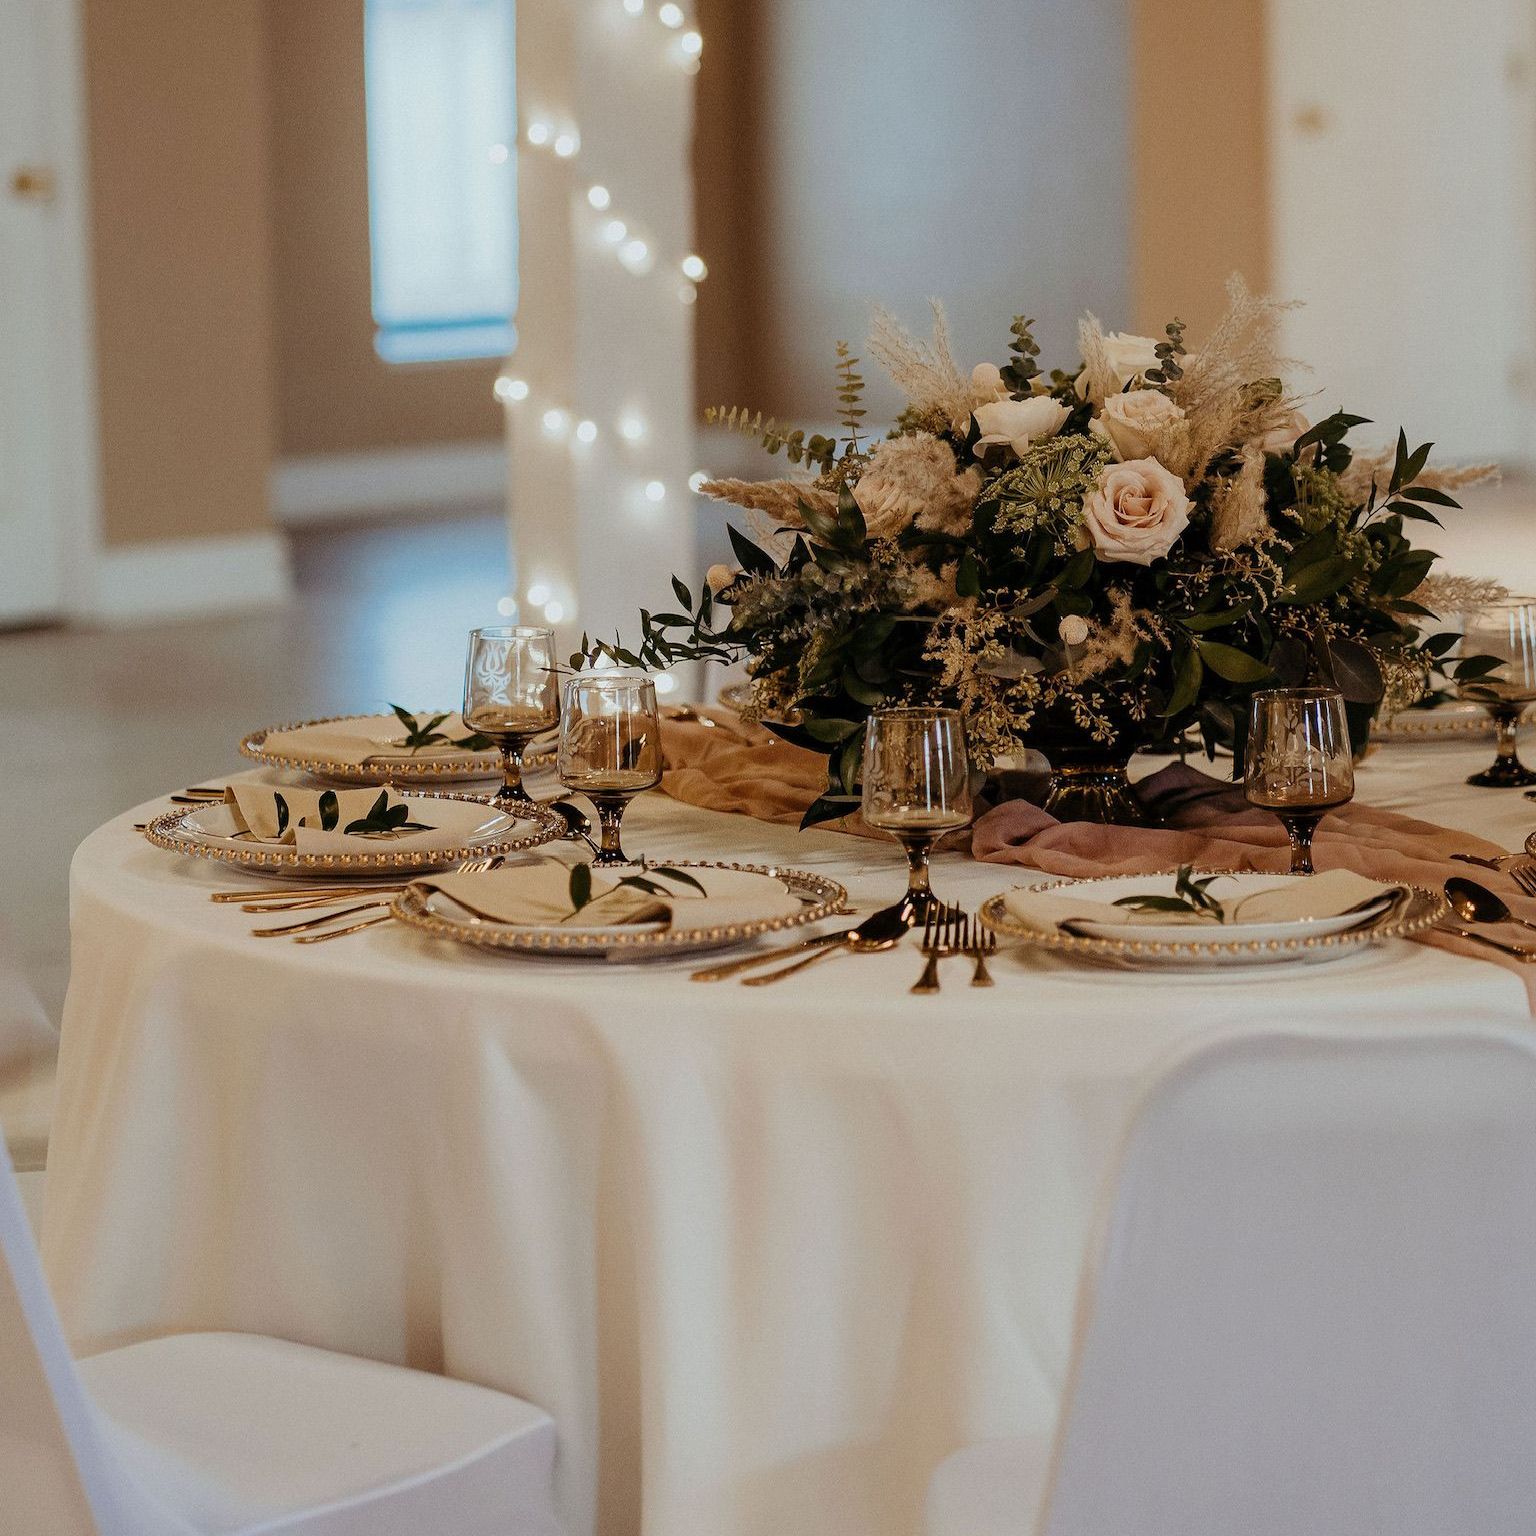 a table set for a wedding reception with flowers in the center